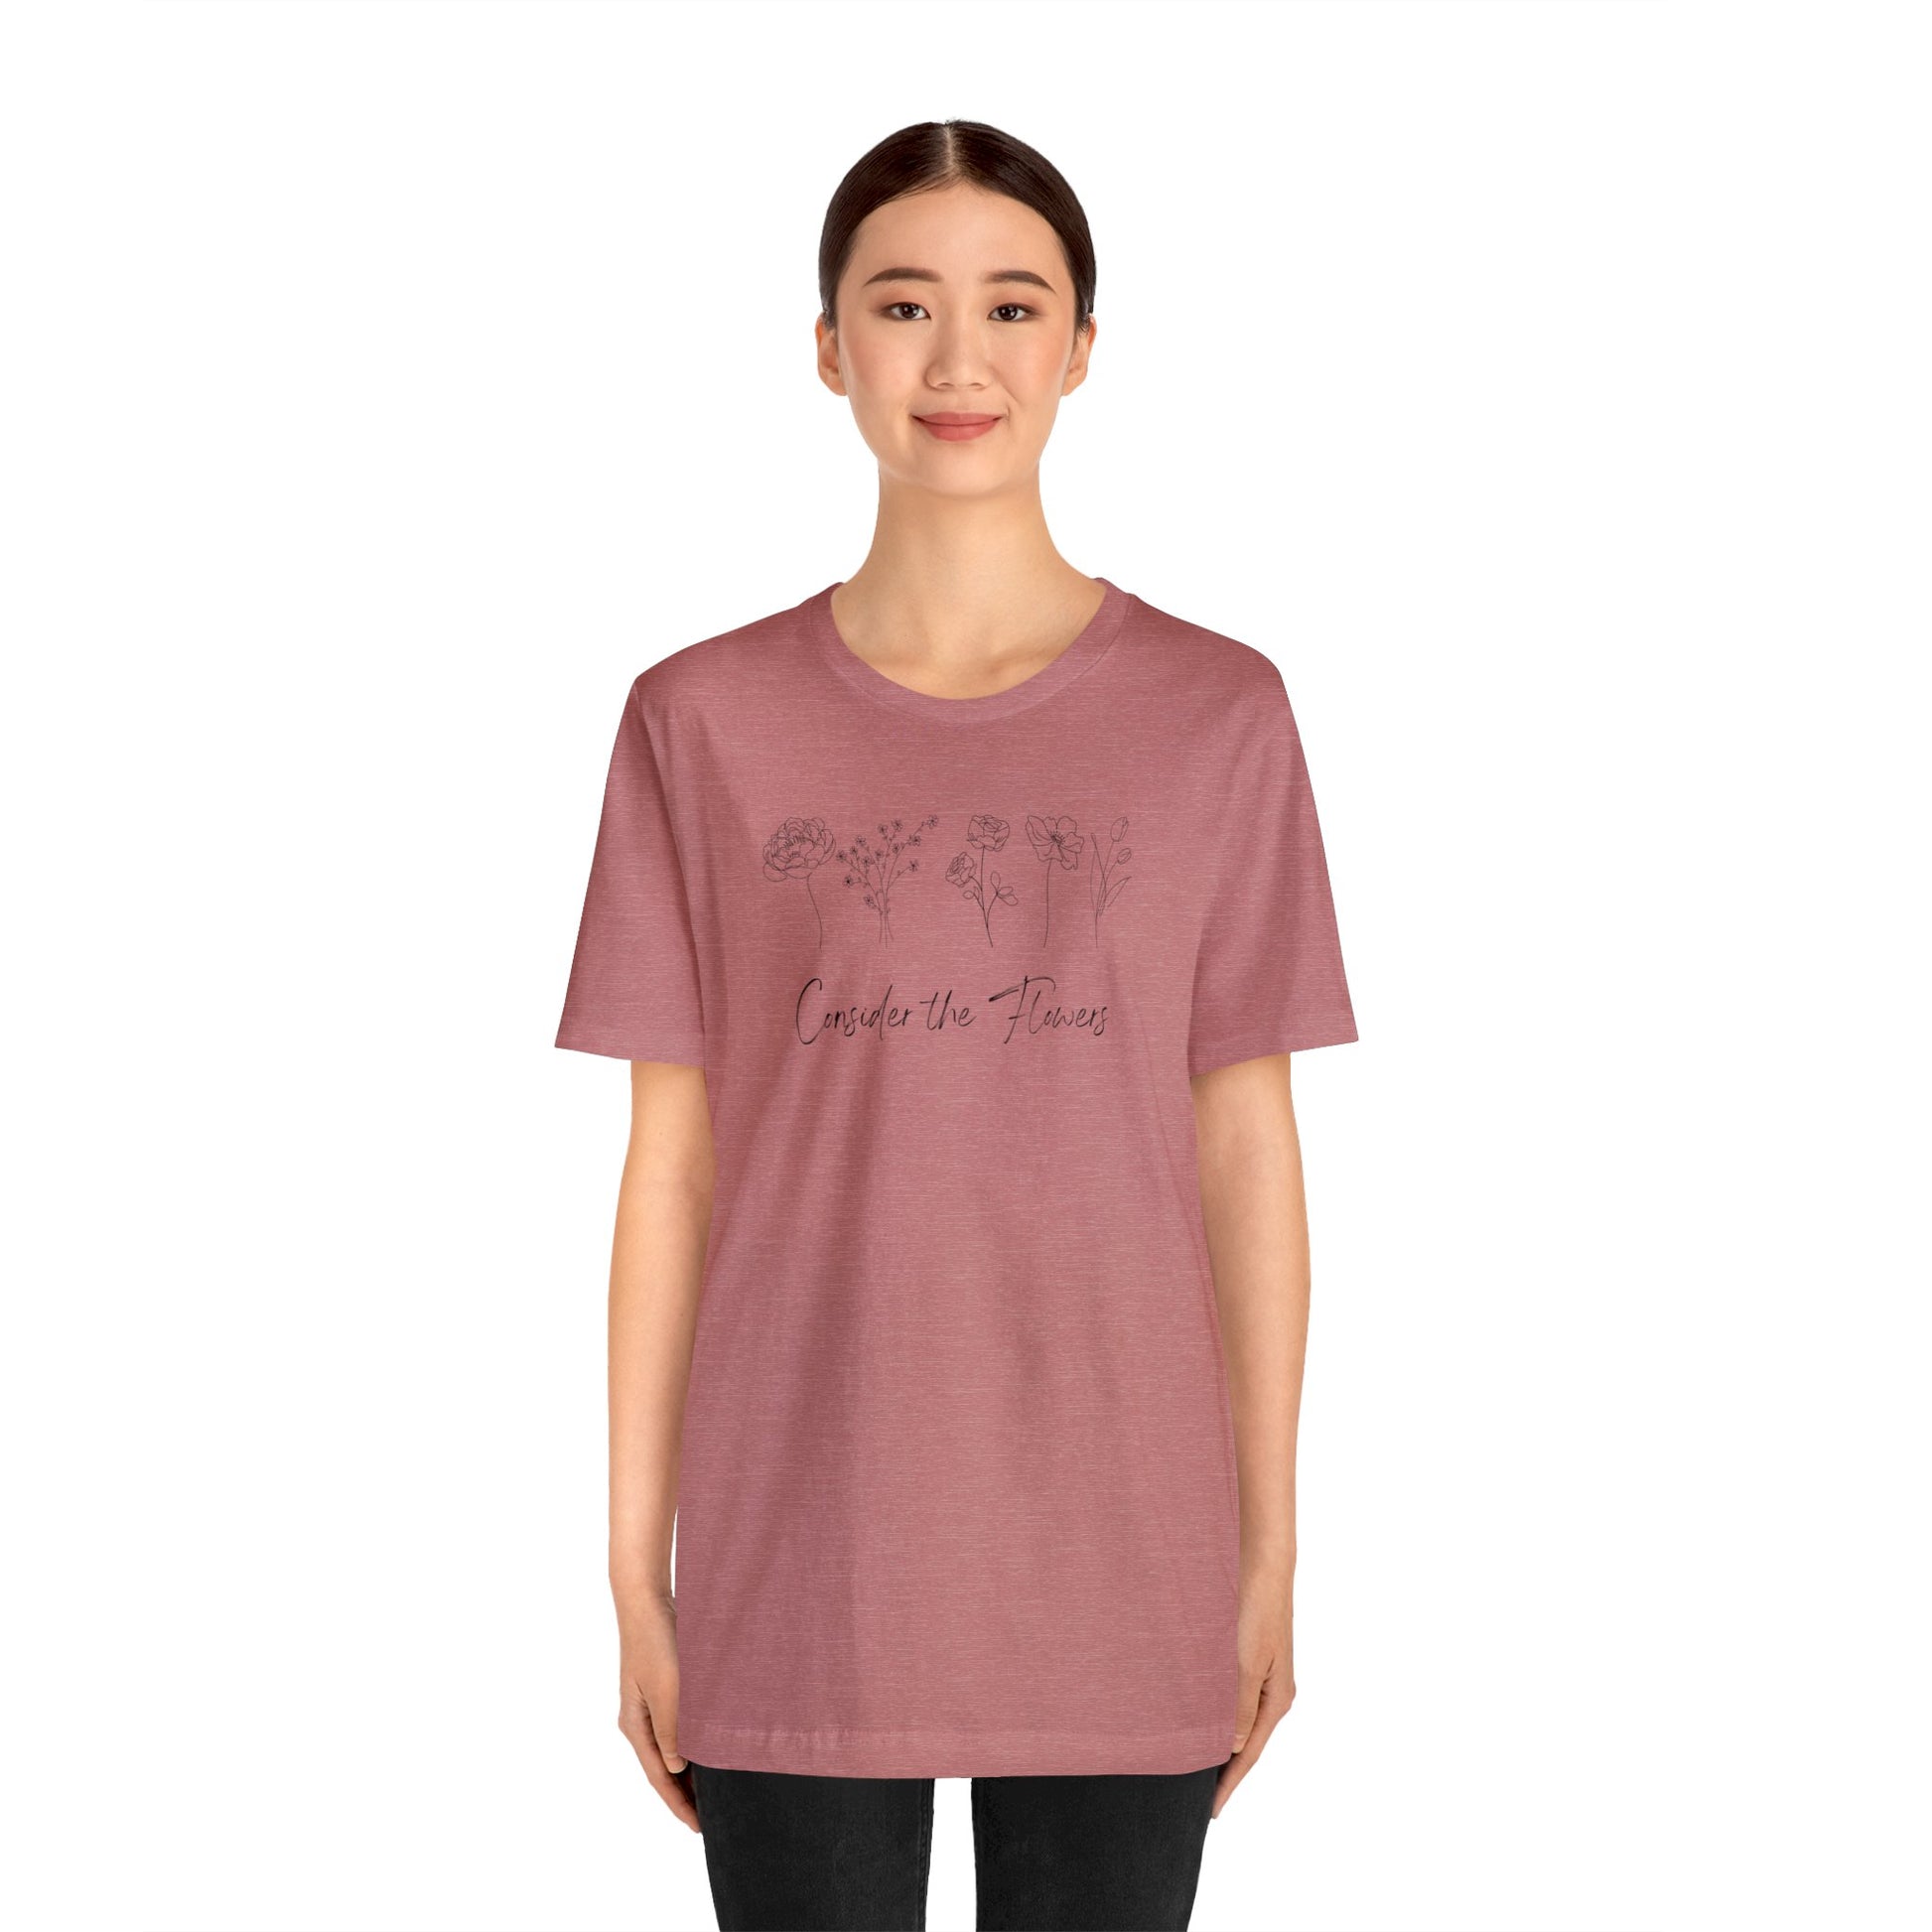 Floral Graphic Tee Heather Mauve Oversized Look